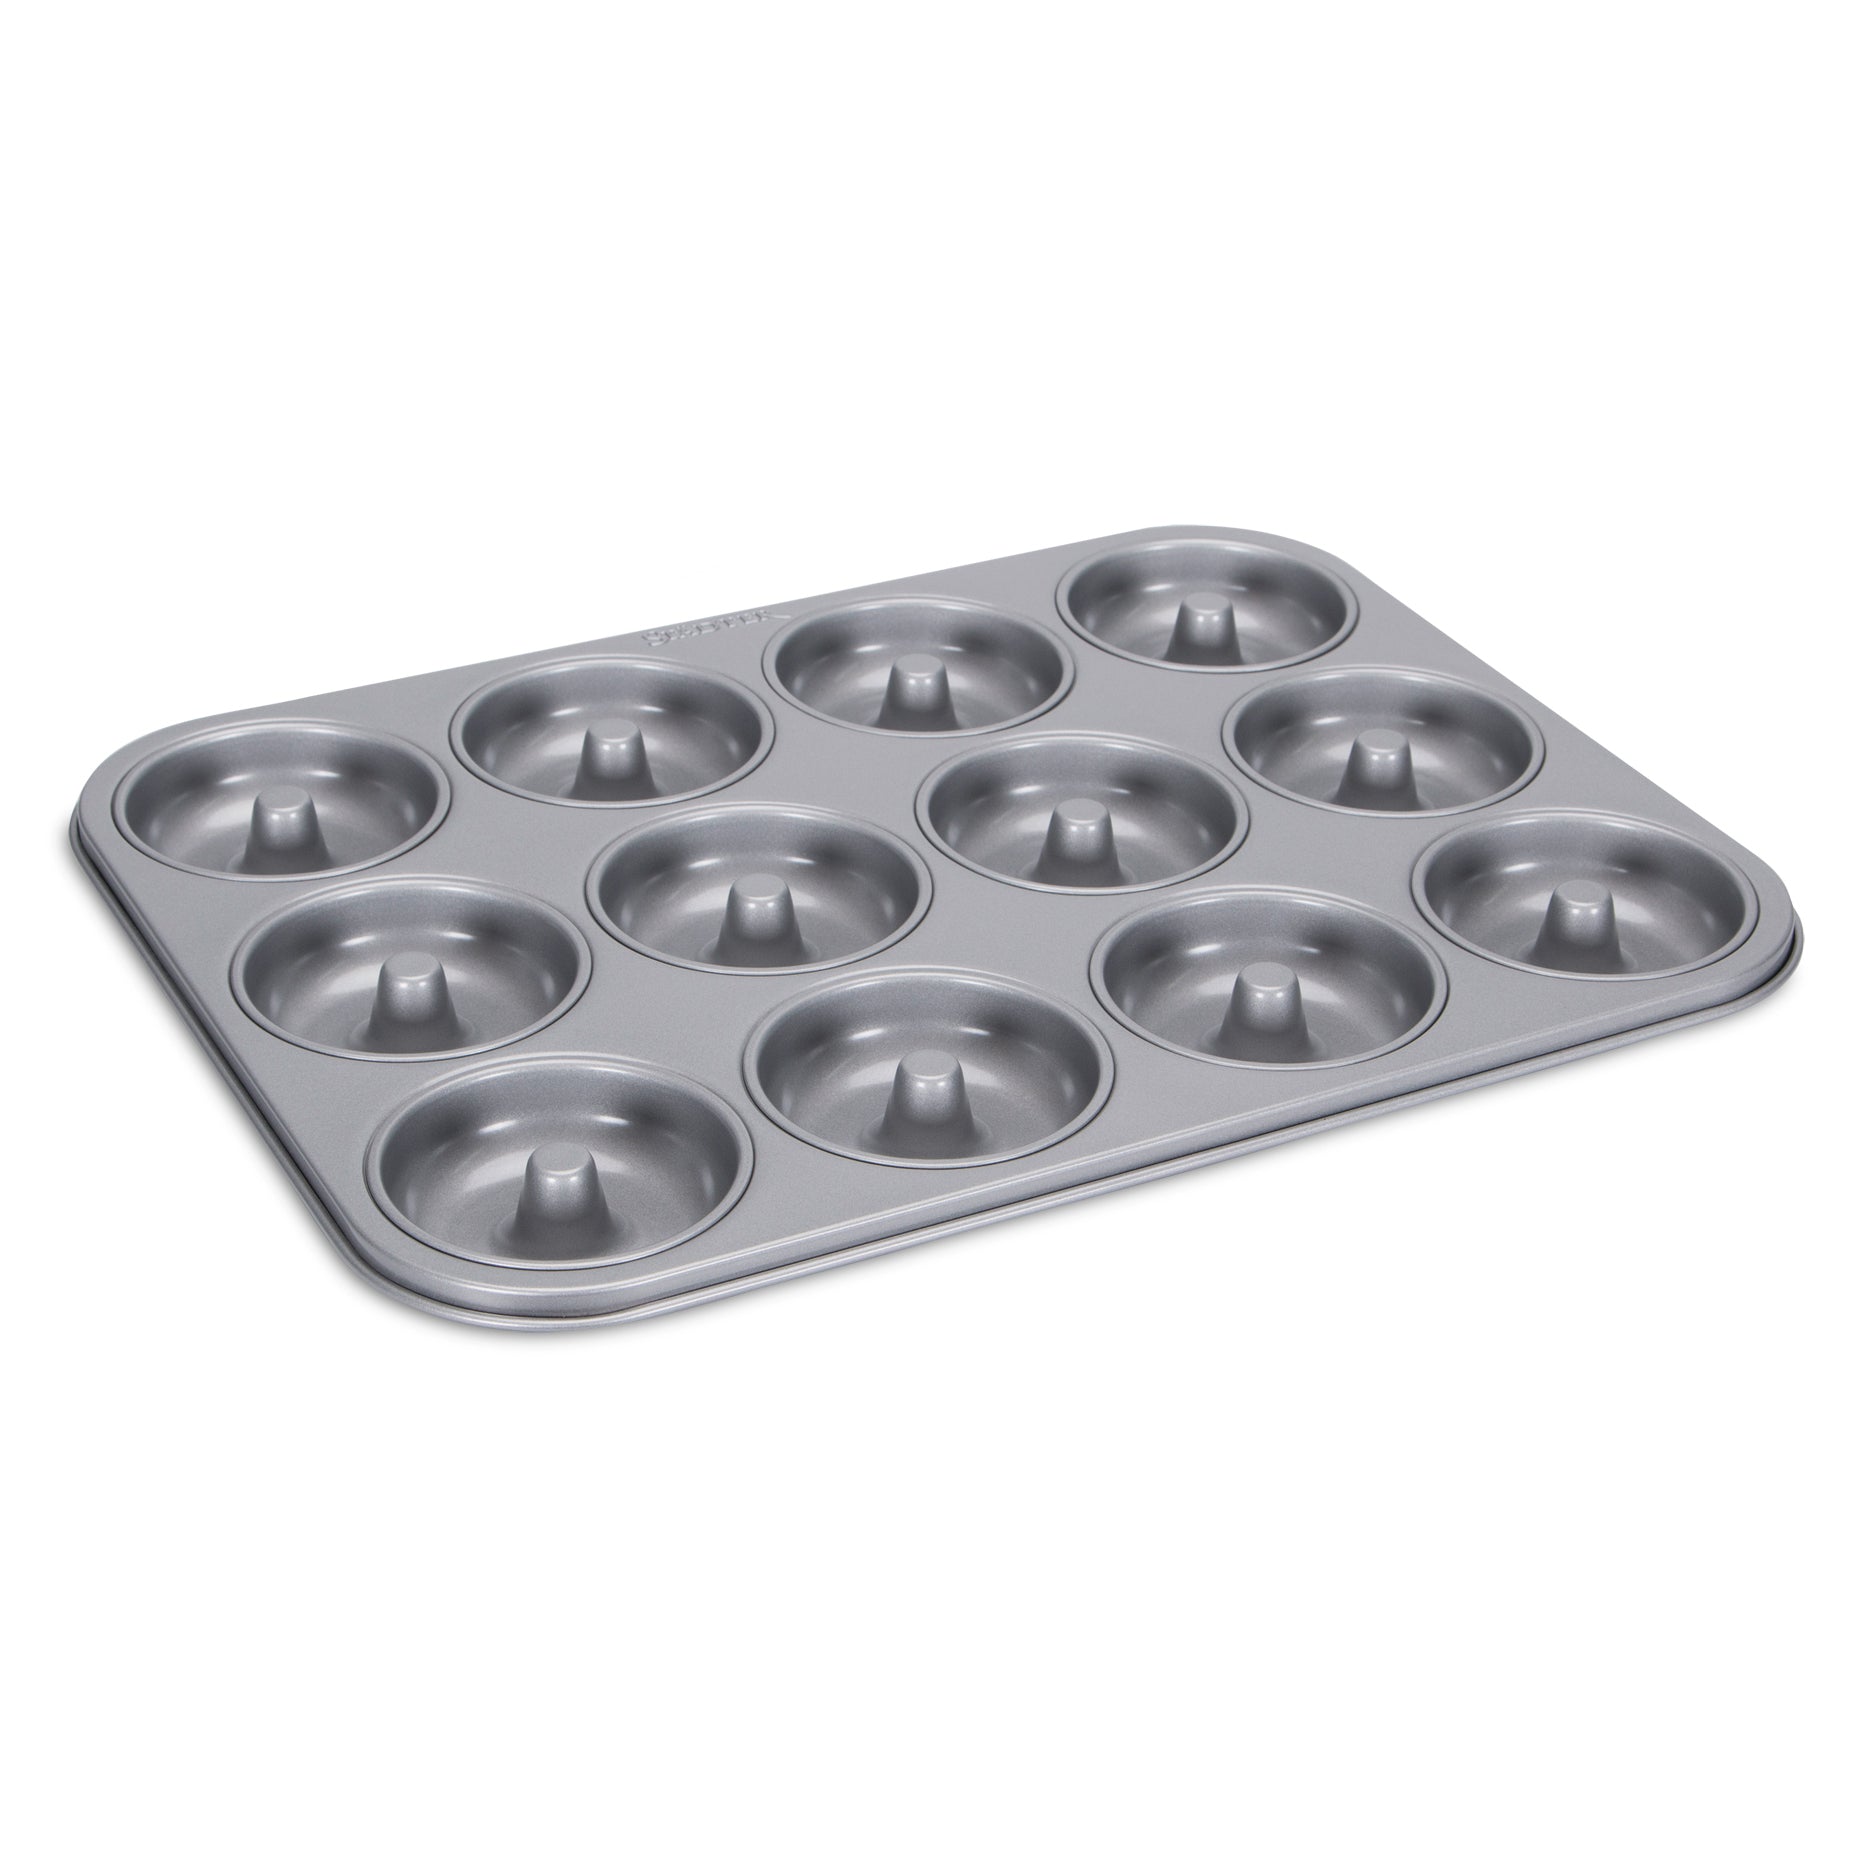 STÄDTER We love baking - 12 cups Donuts pan